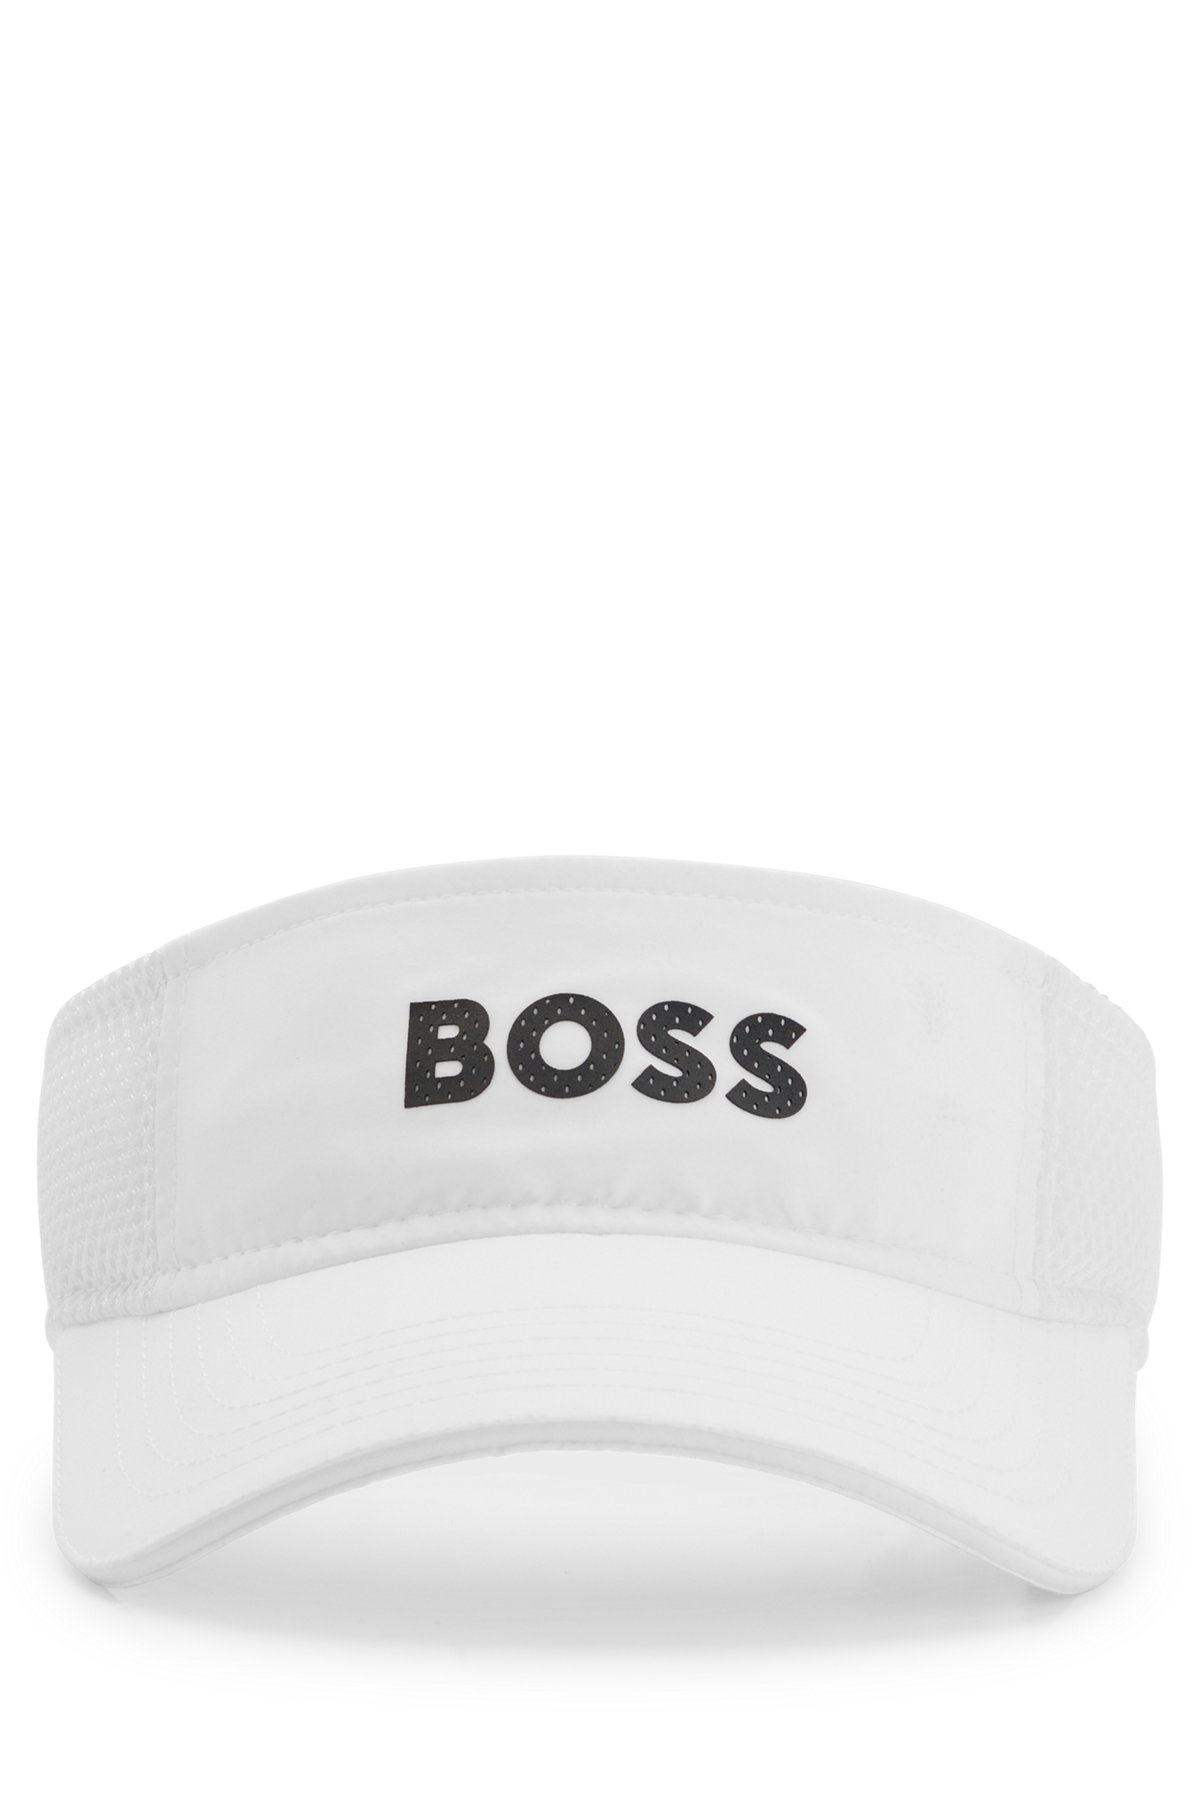 Contrast-logo visor in stretch structured mesh, White